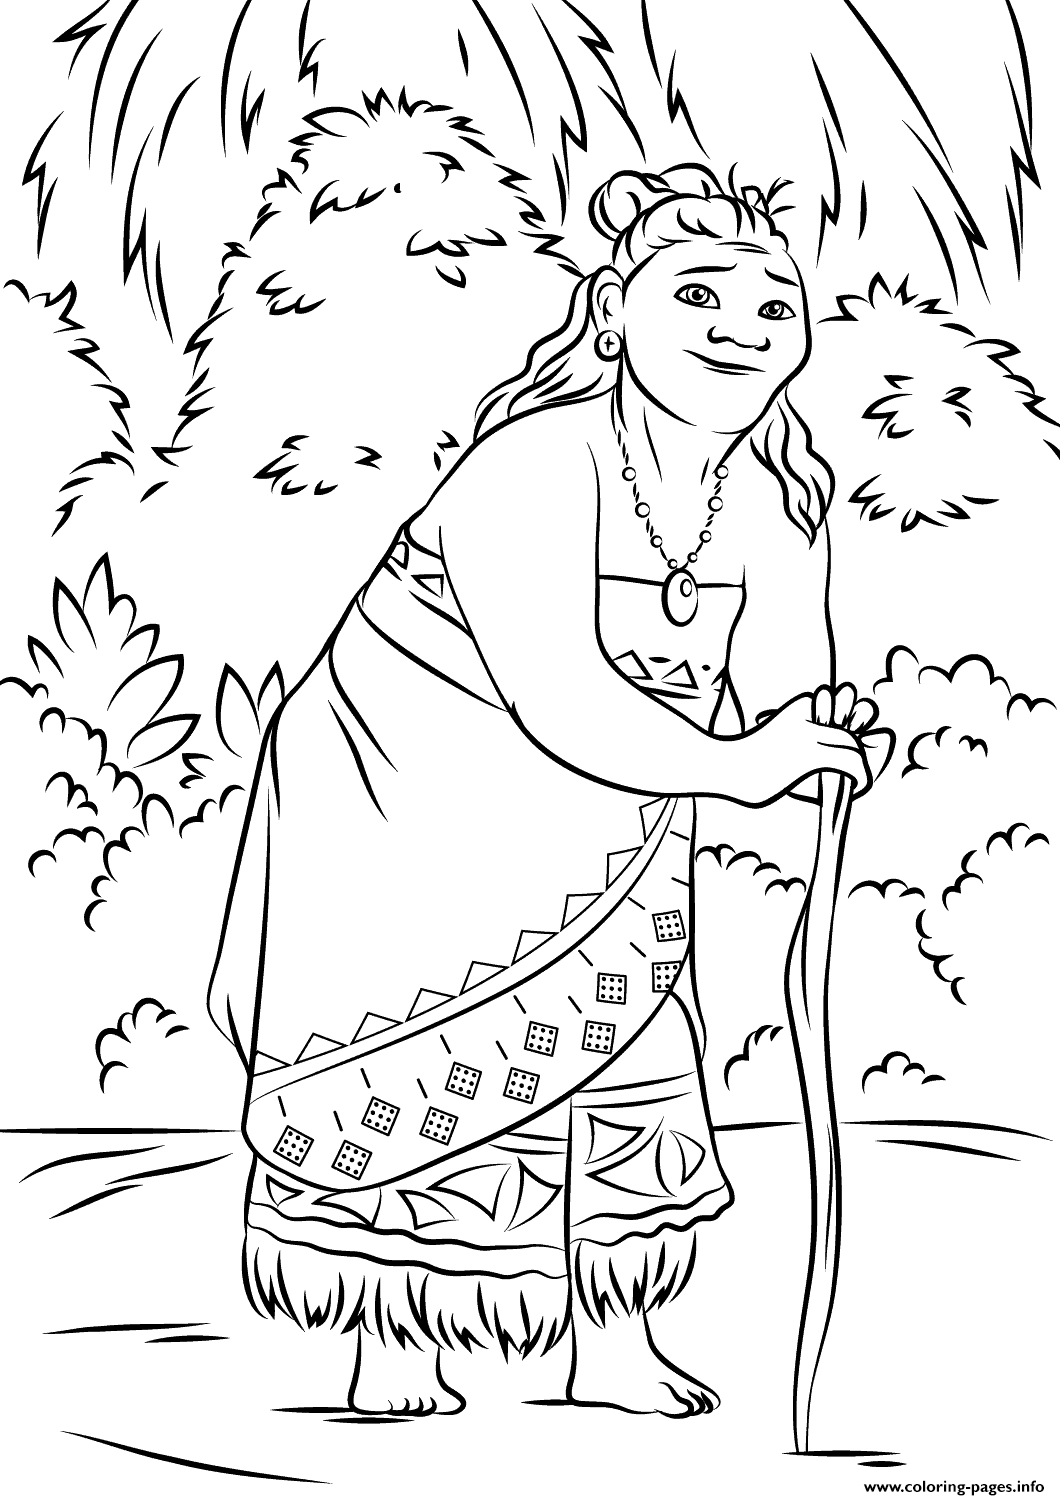 gramma tala from moana disney Coloring pages Printable